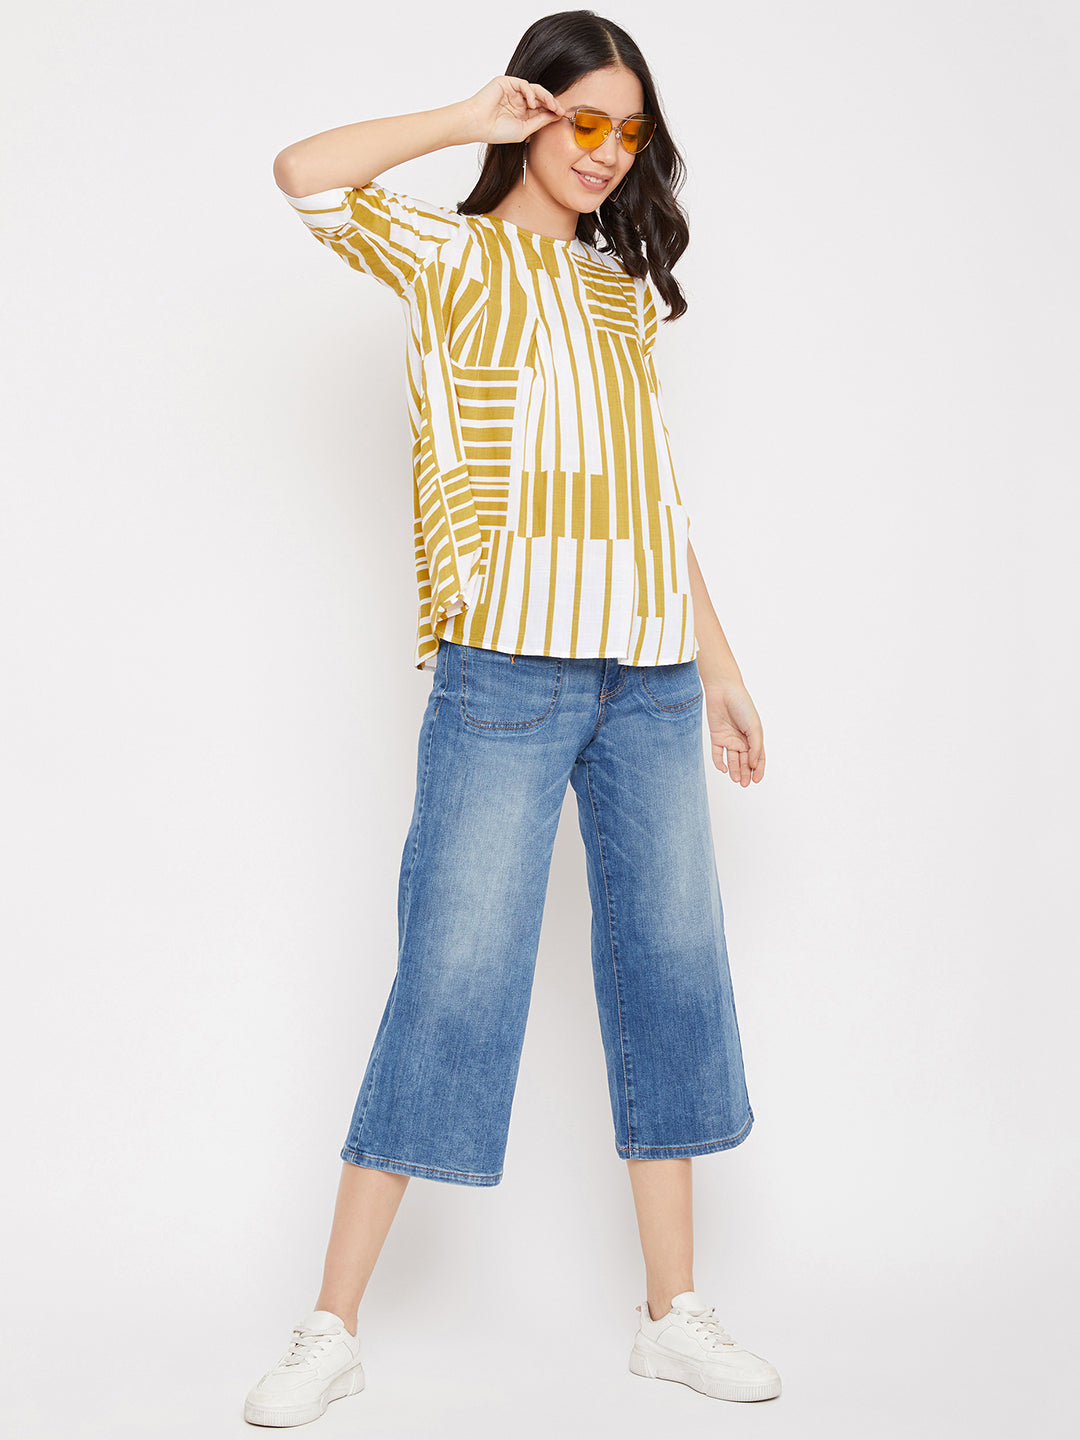 Yellow and White Colour blocked Top - Women Tops